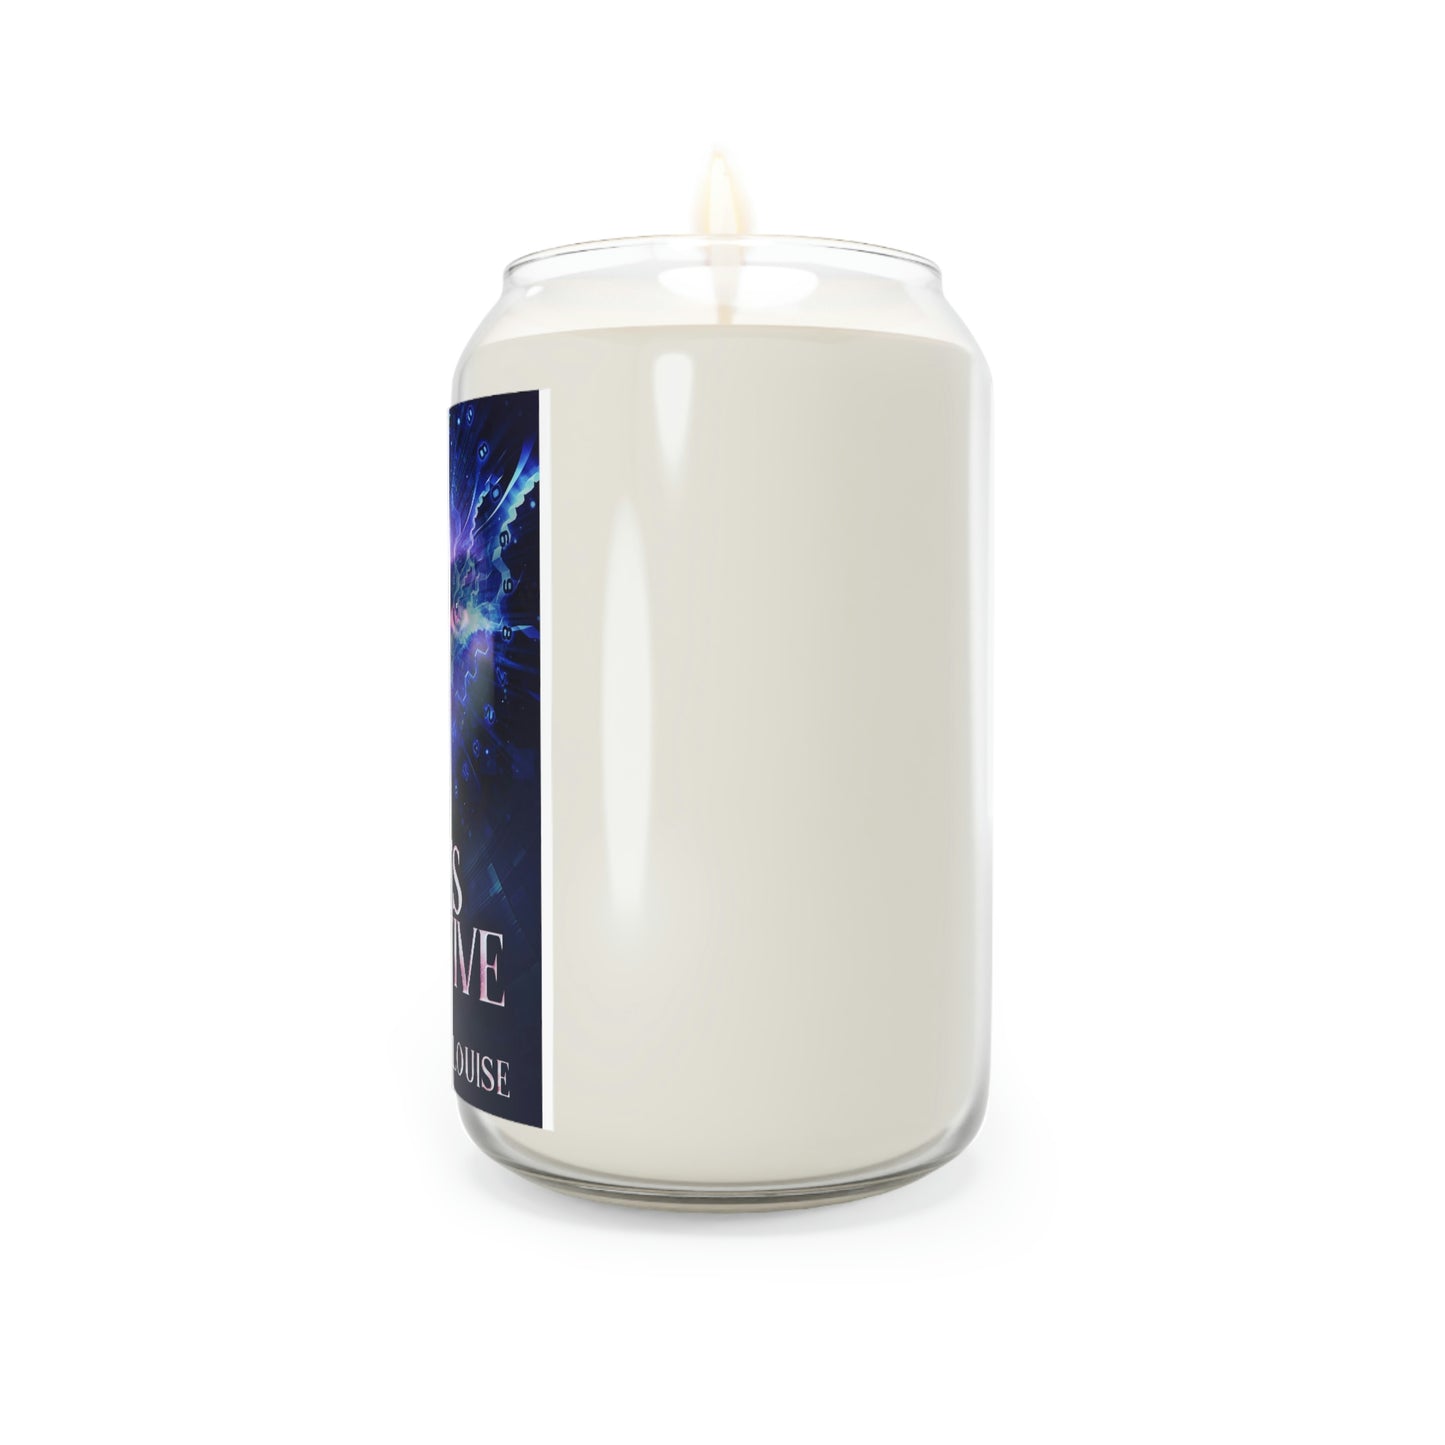 Time's Relative - Scented Candle